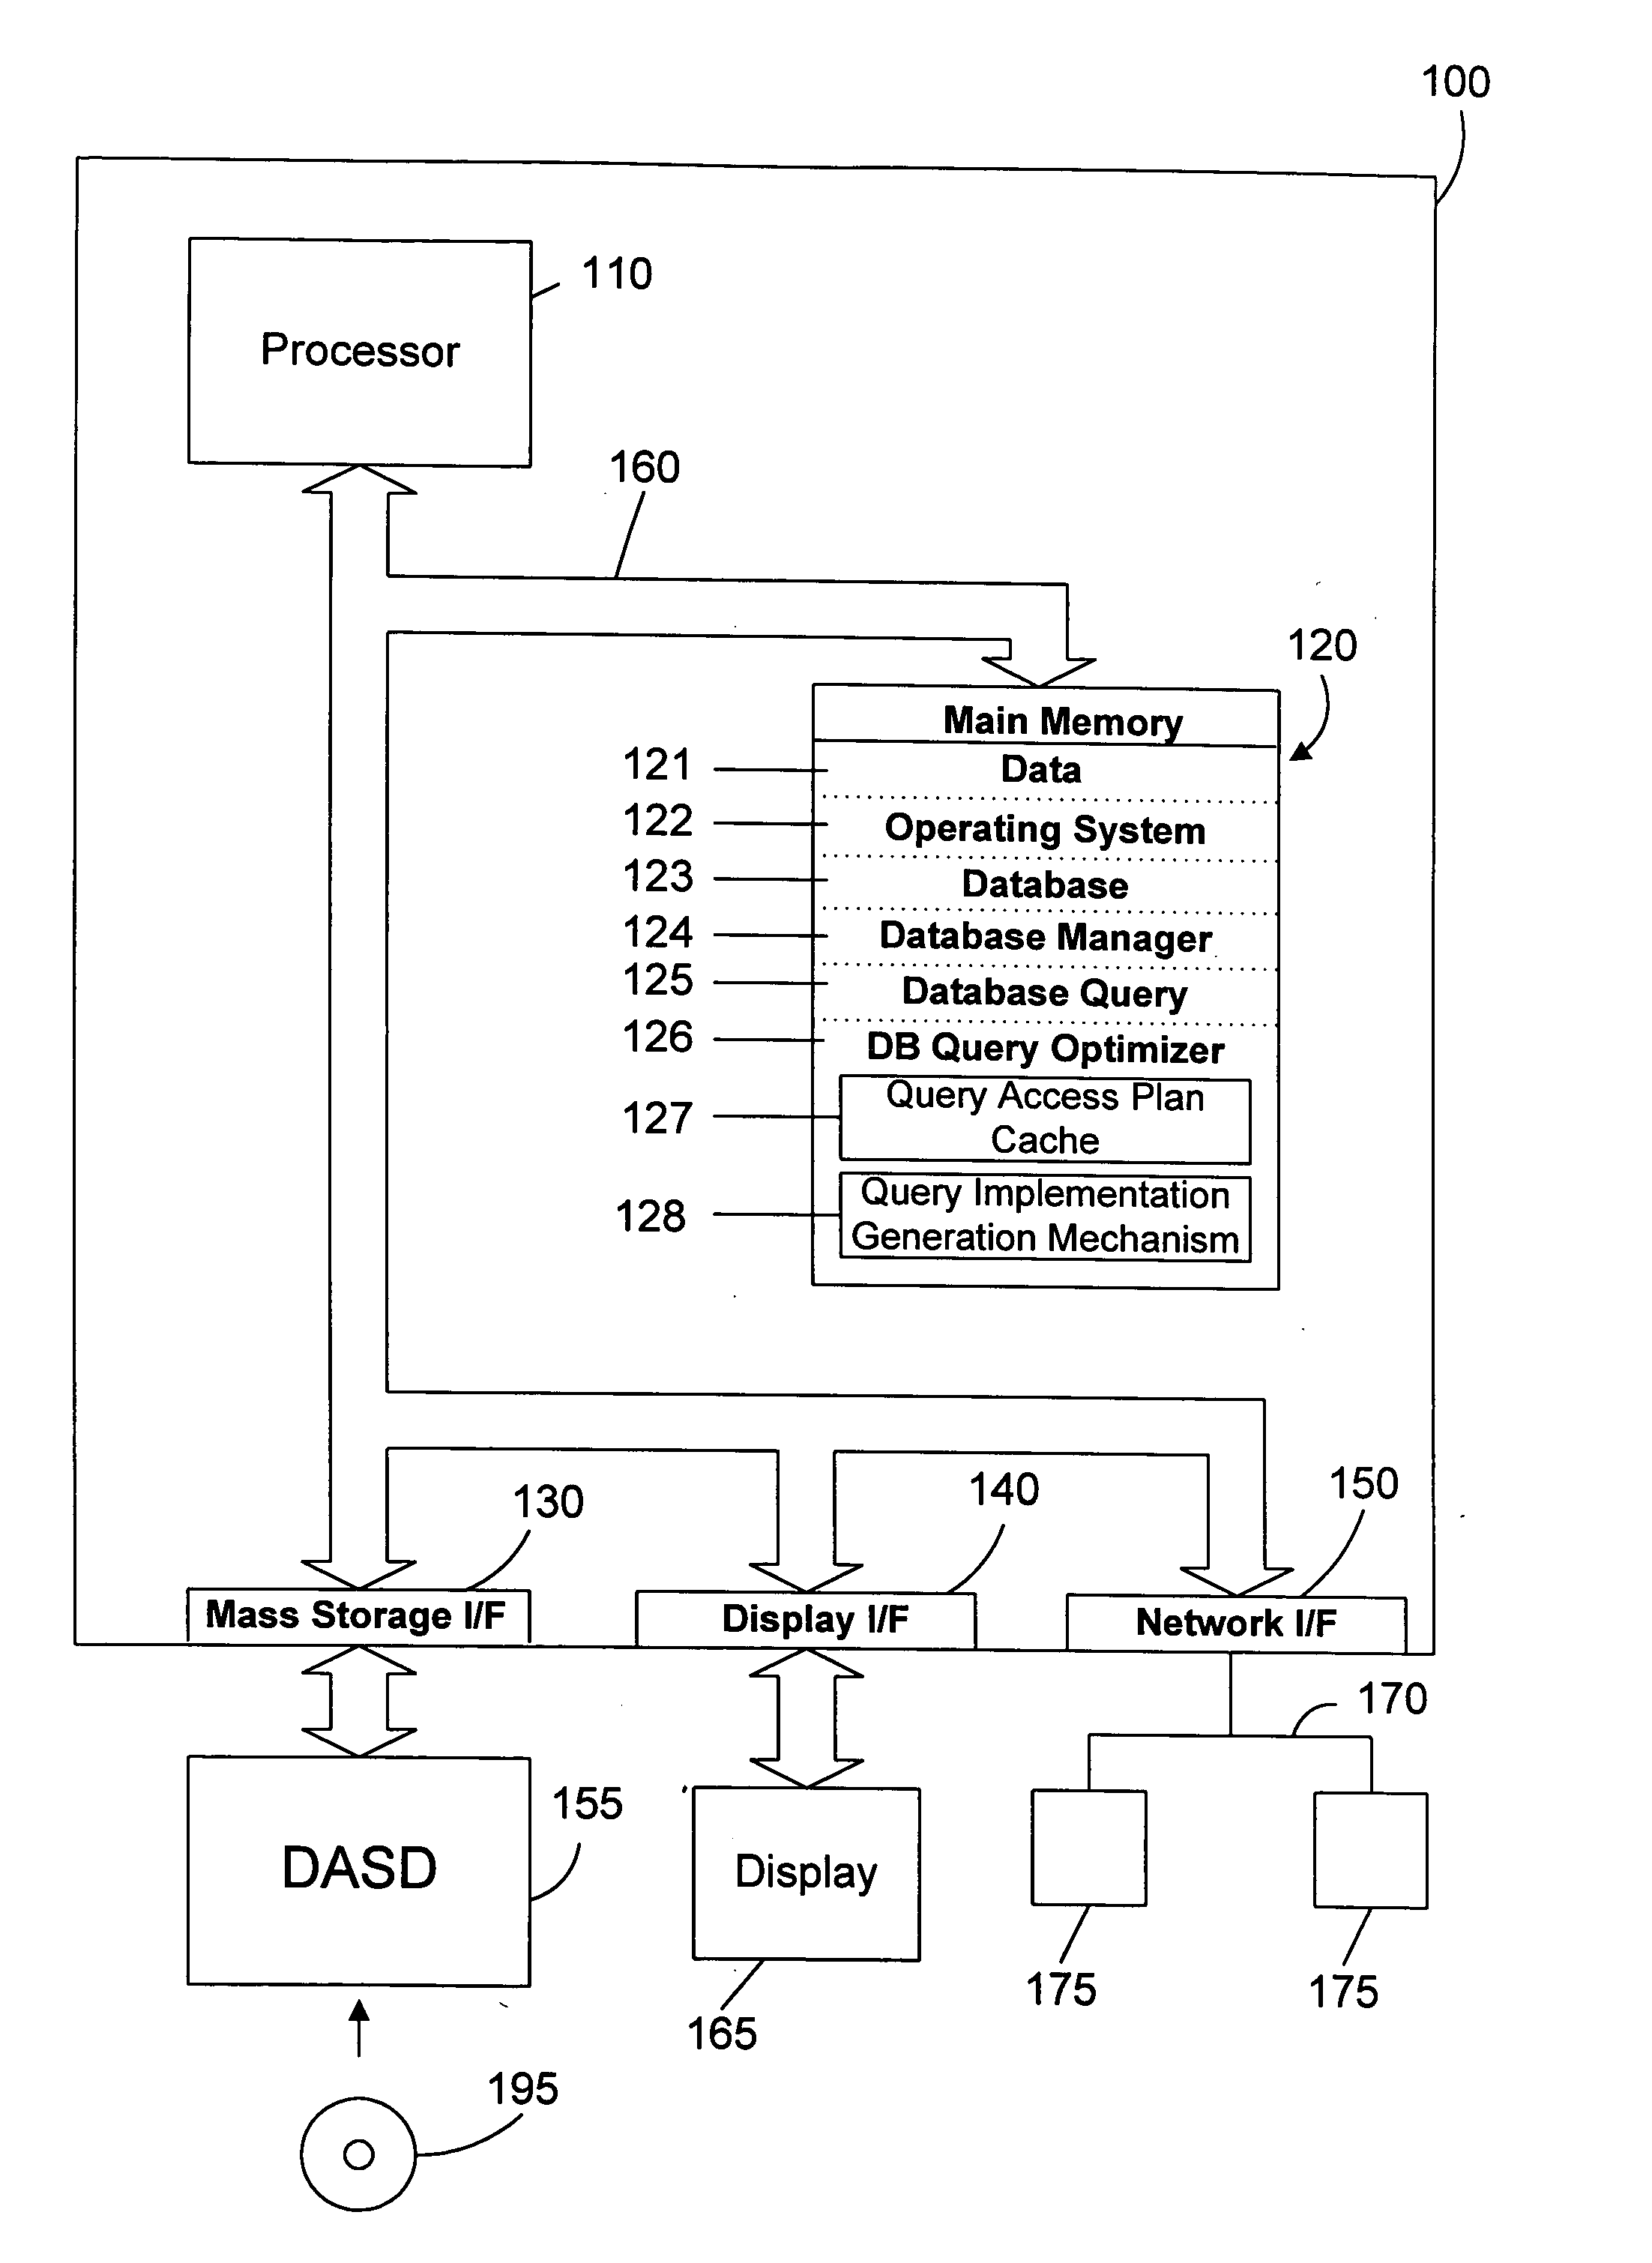 Apparatus and method for autonomically generating a query implementation that meets a defined performance specification